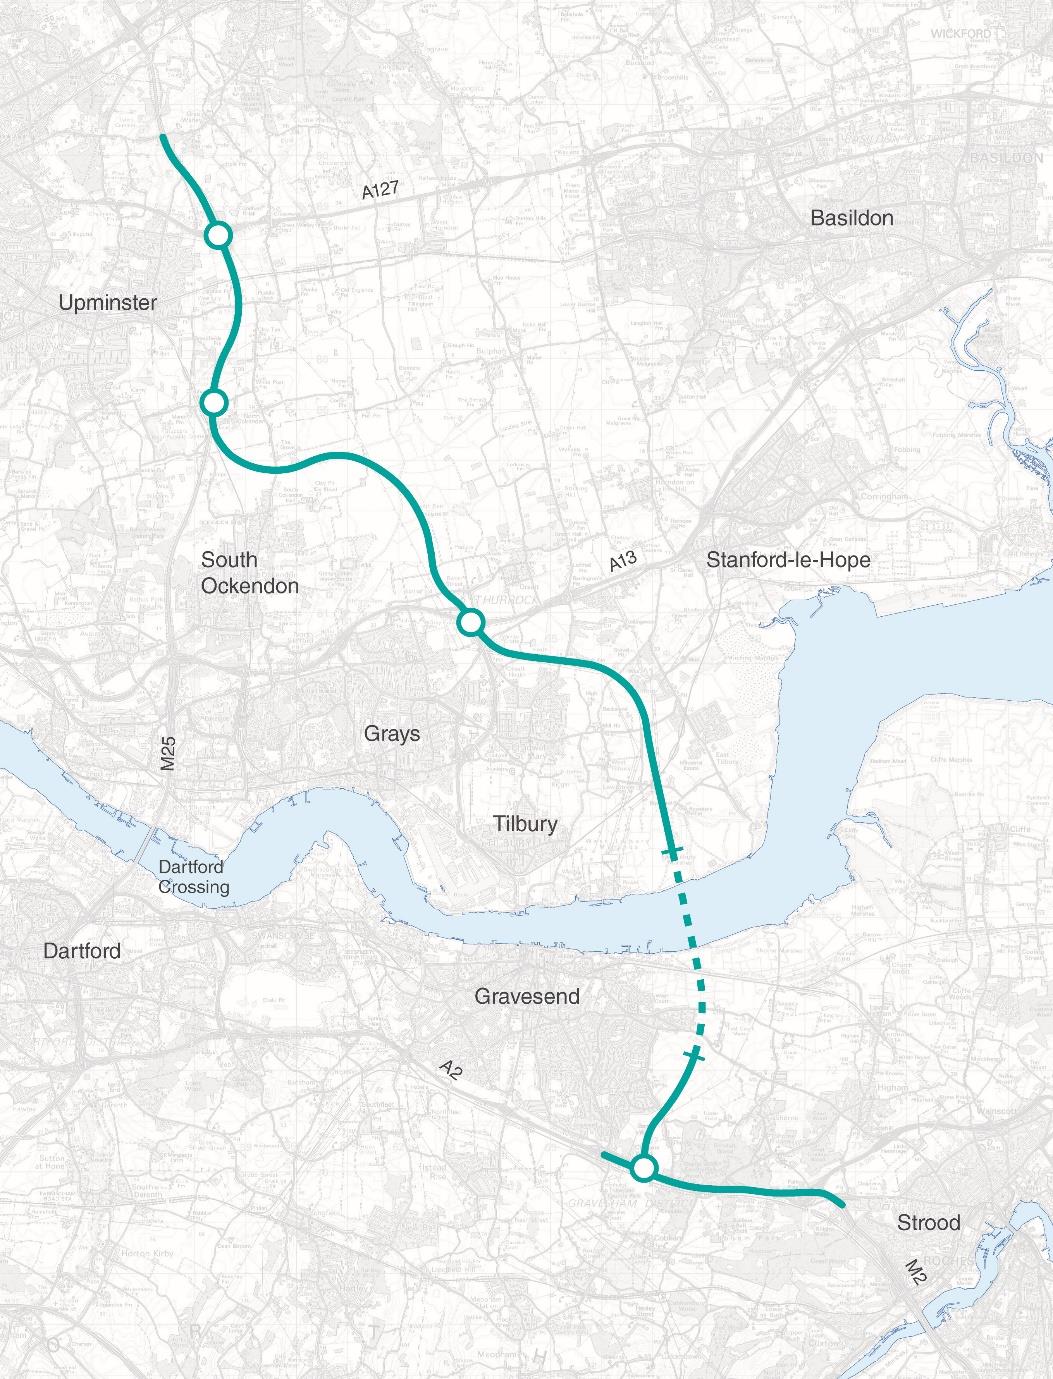 The proposed Lower Thames Crossing Route (July 2020)